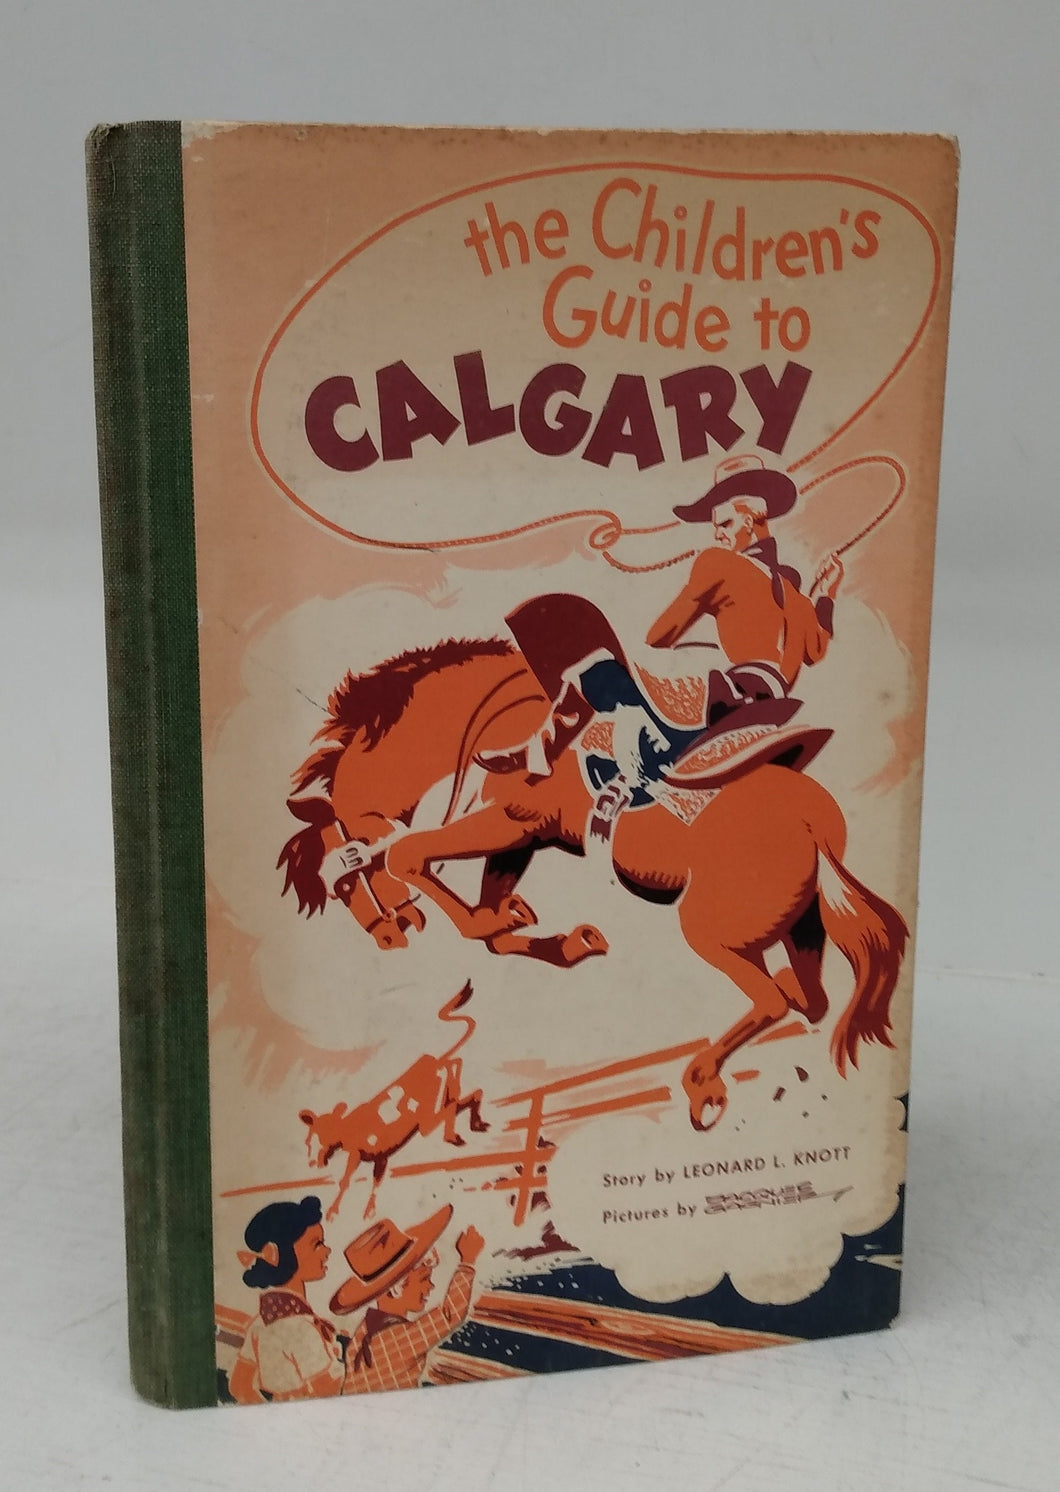 The Children's Guide to Calgary